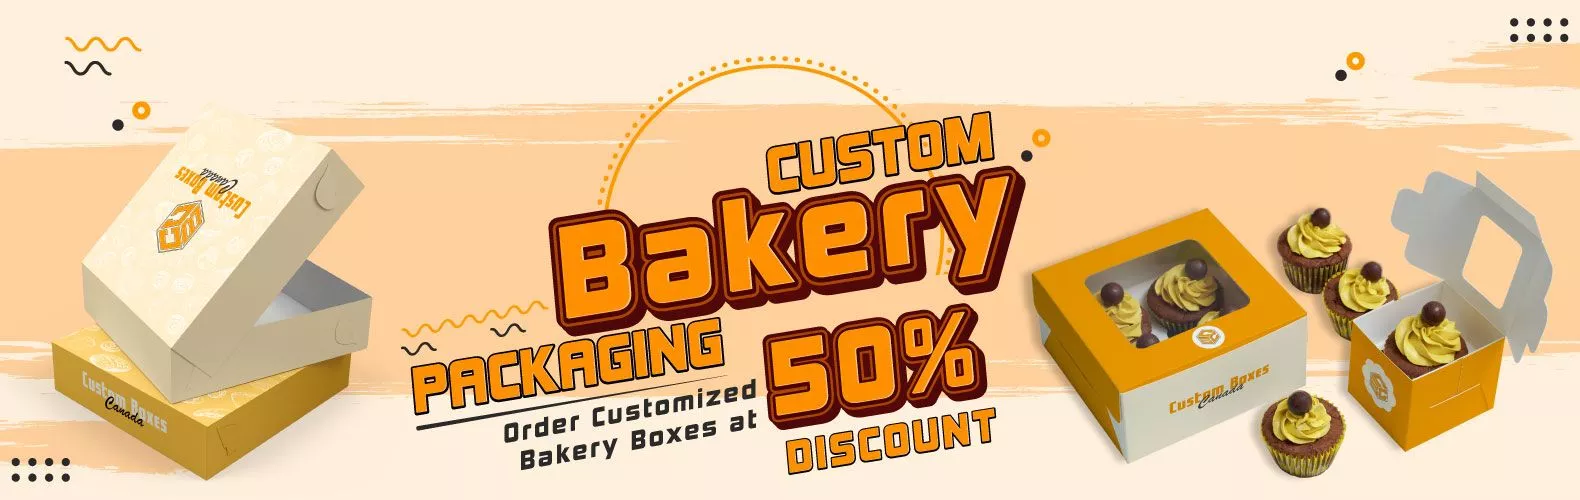 Bakery Boxes Banner CBC